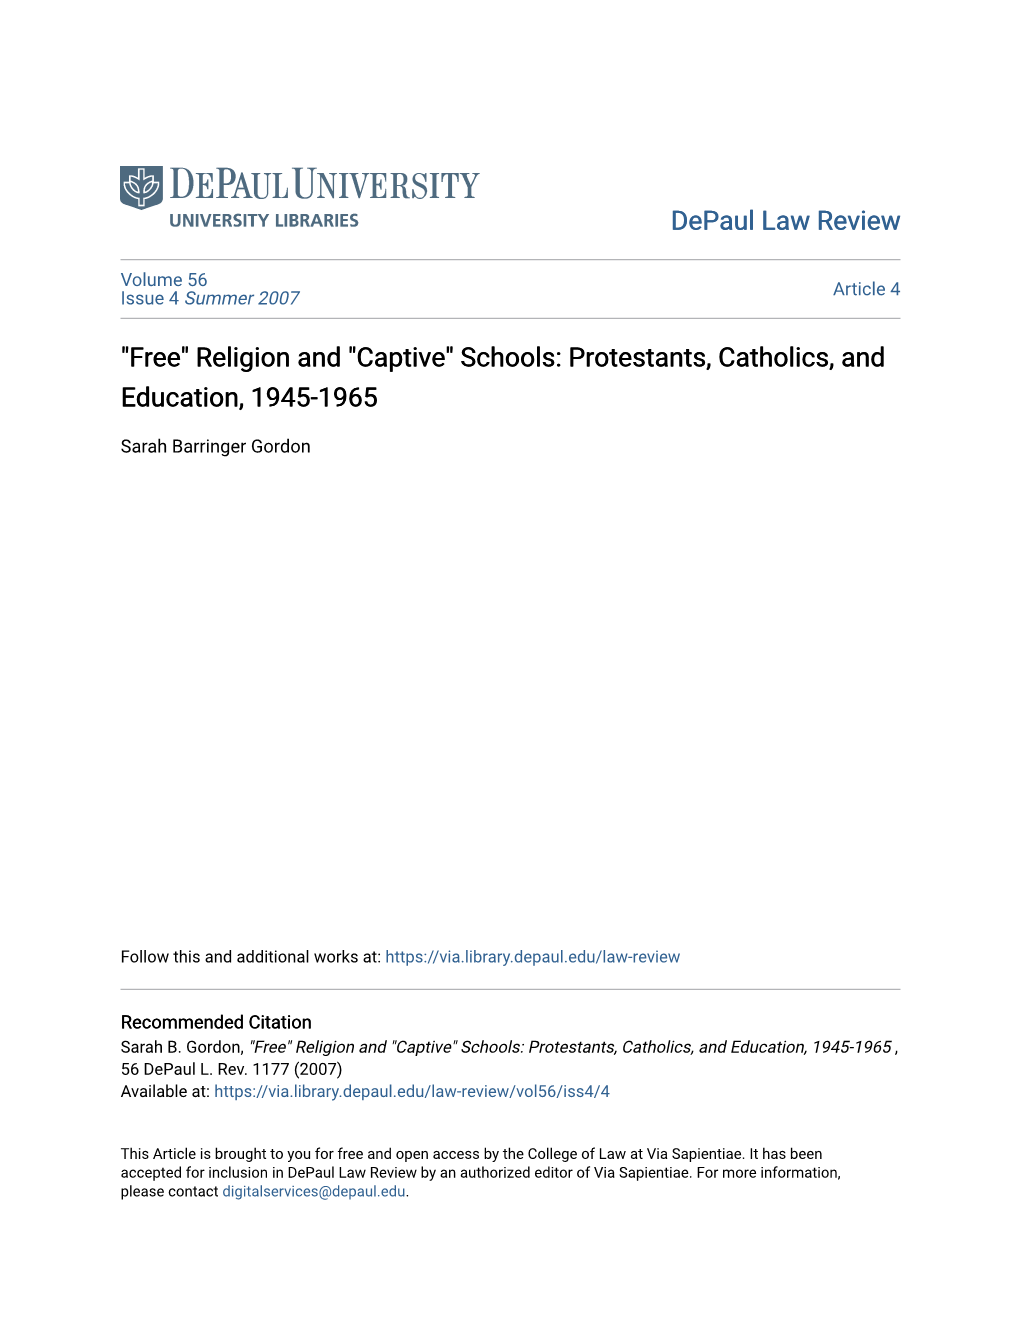 Religion and "Captive" Schools: Protestants, Catholics, and Education, 1945-1965